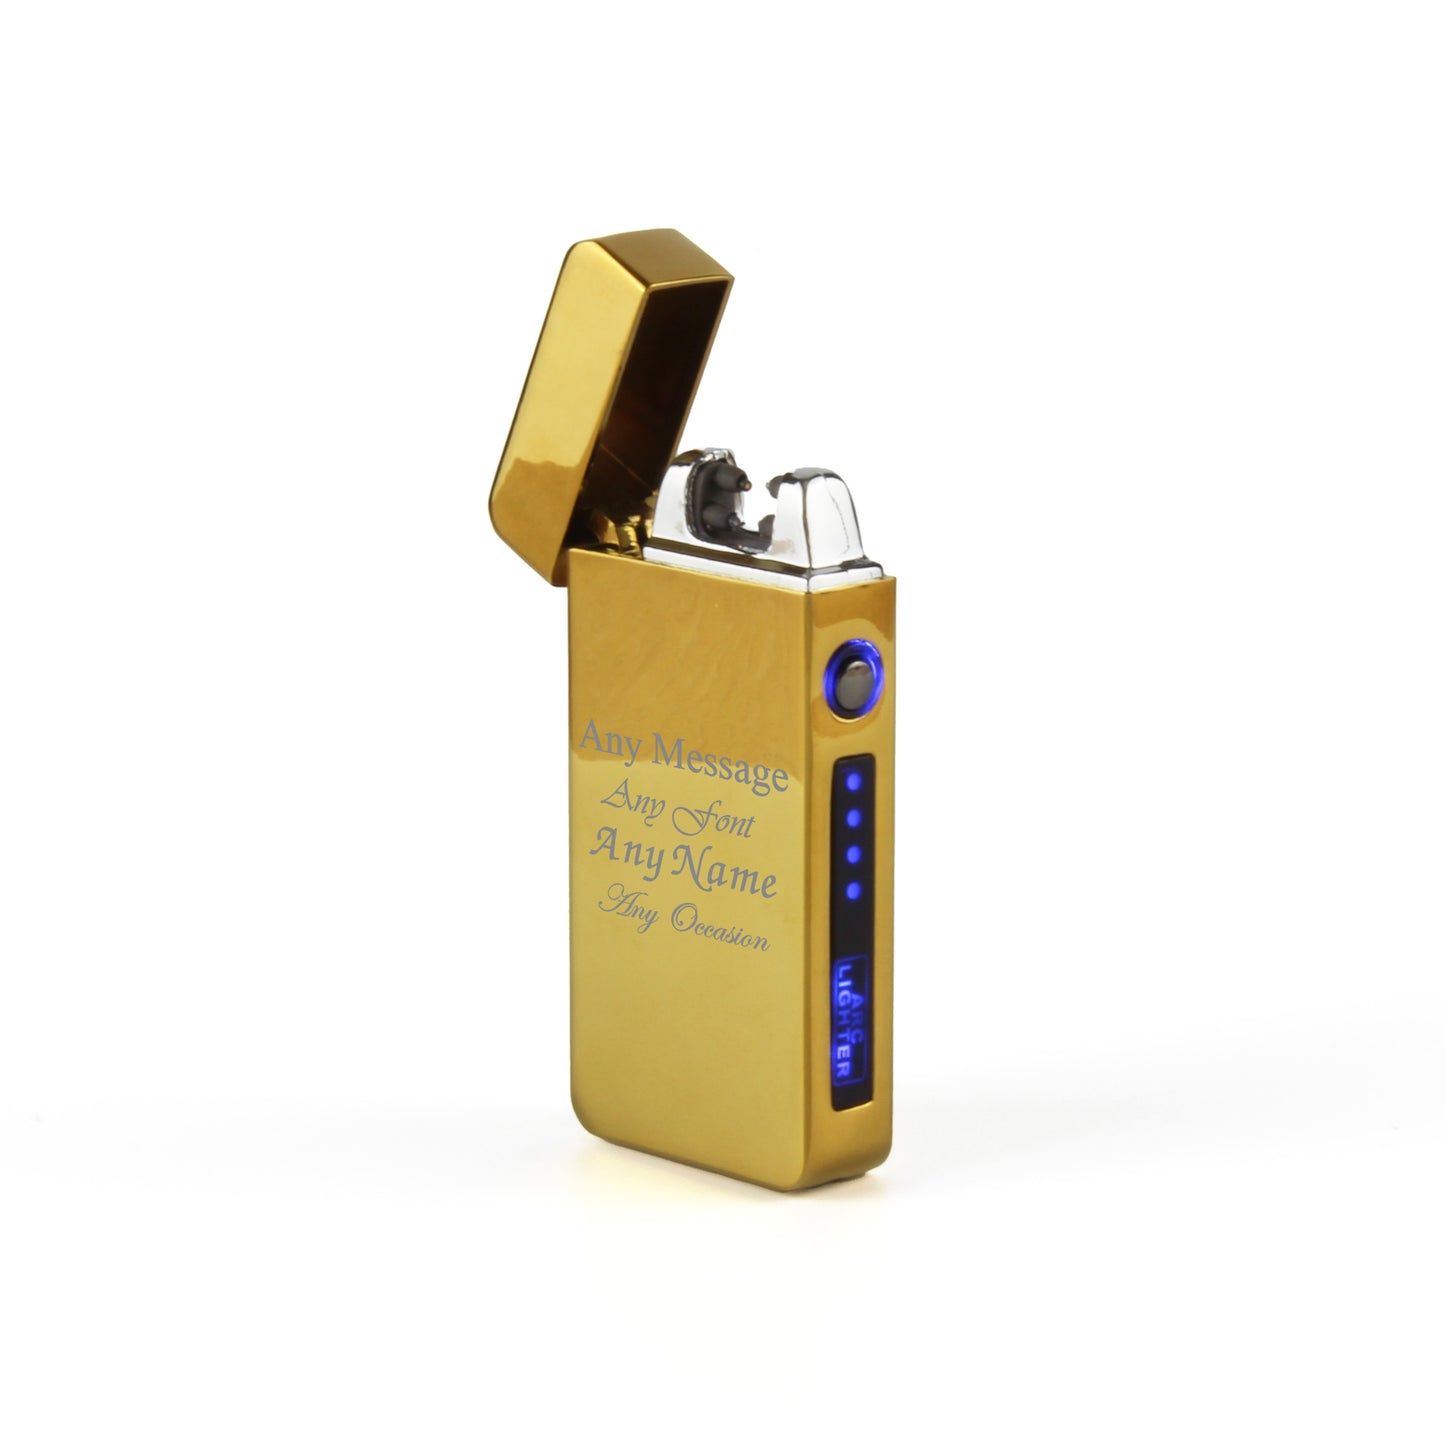 Engraved Electric Arc Lighter, Gold, Any Message, Gift Boxed Image 3